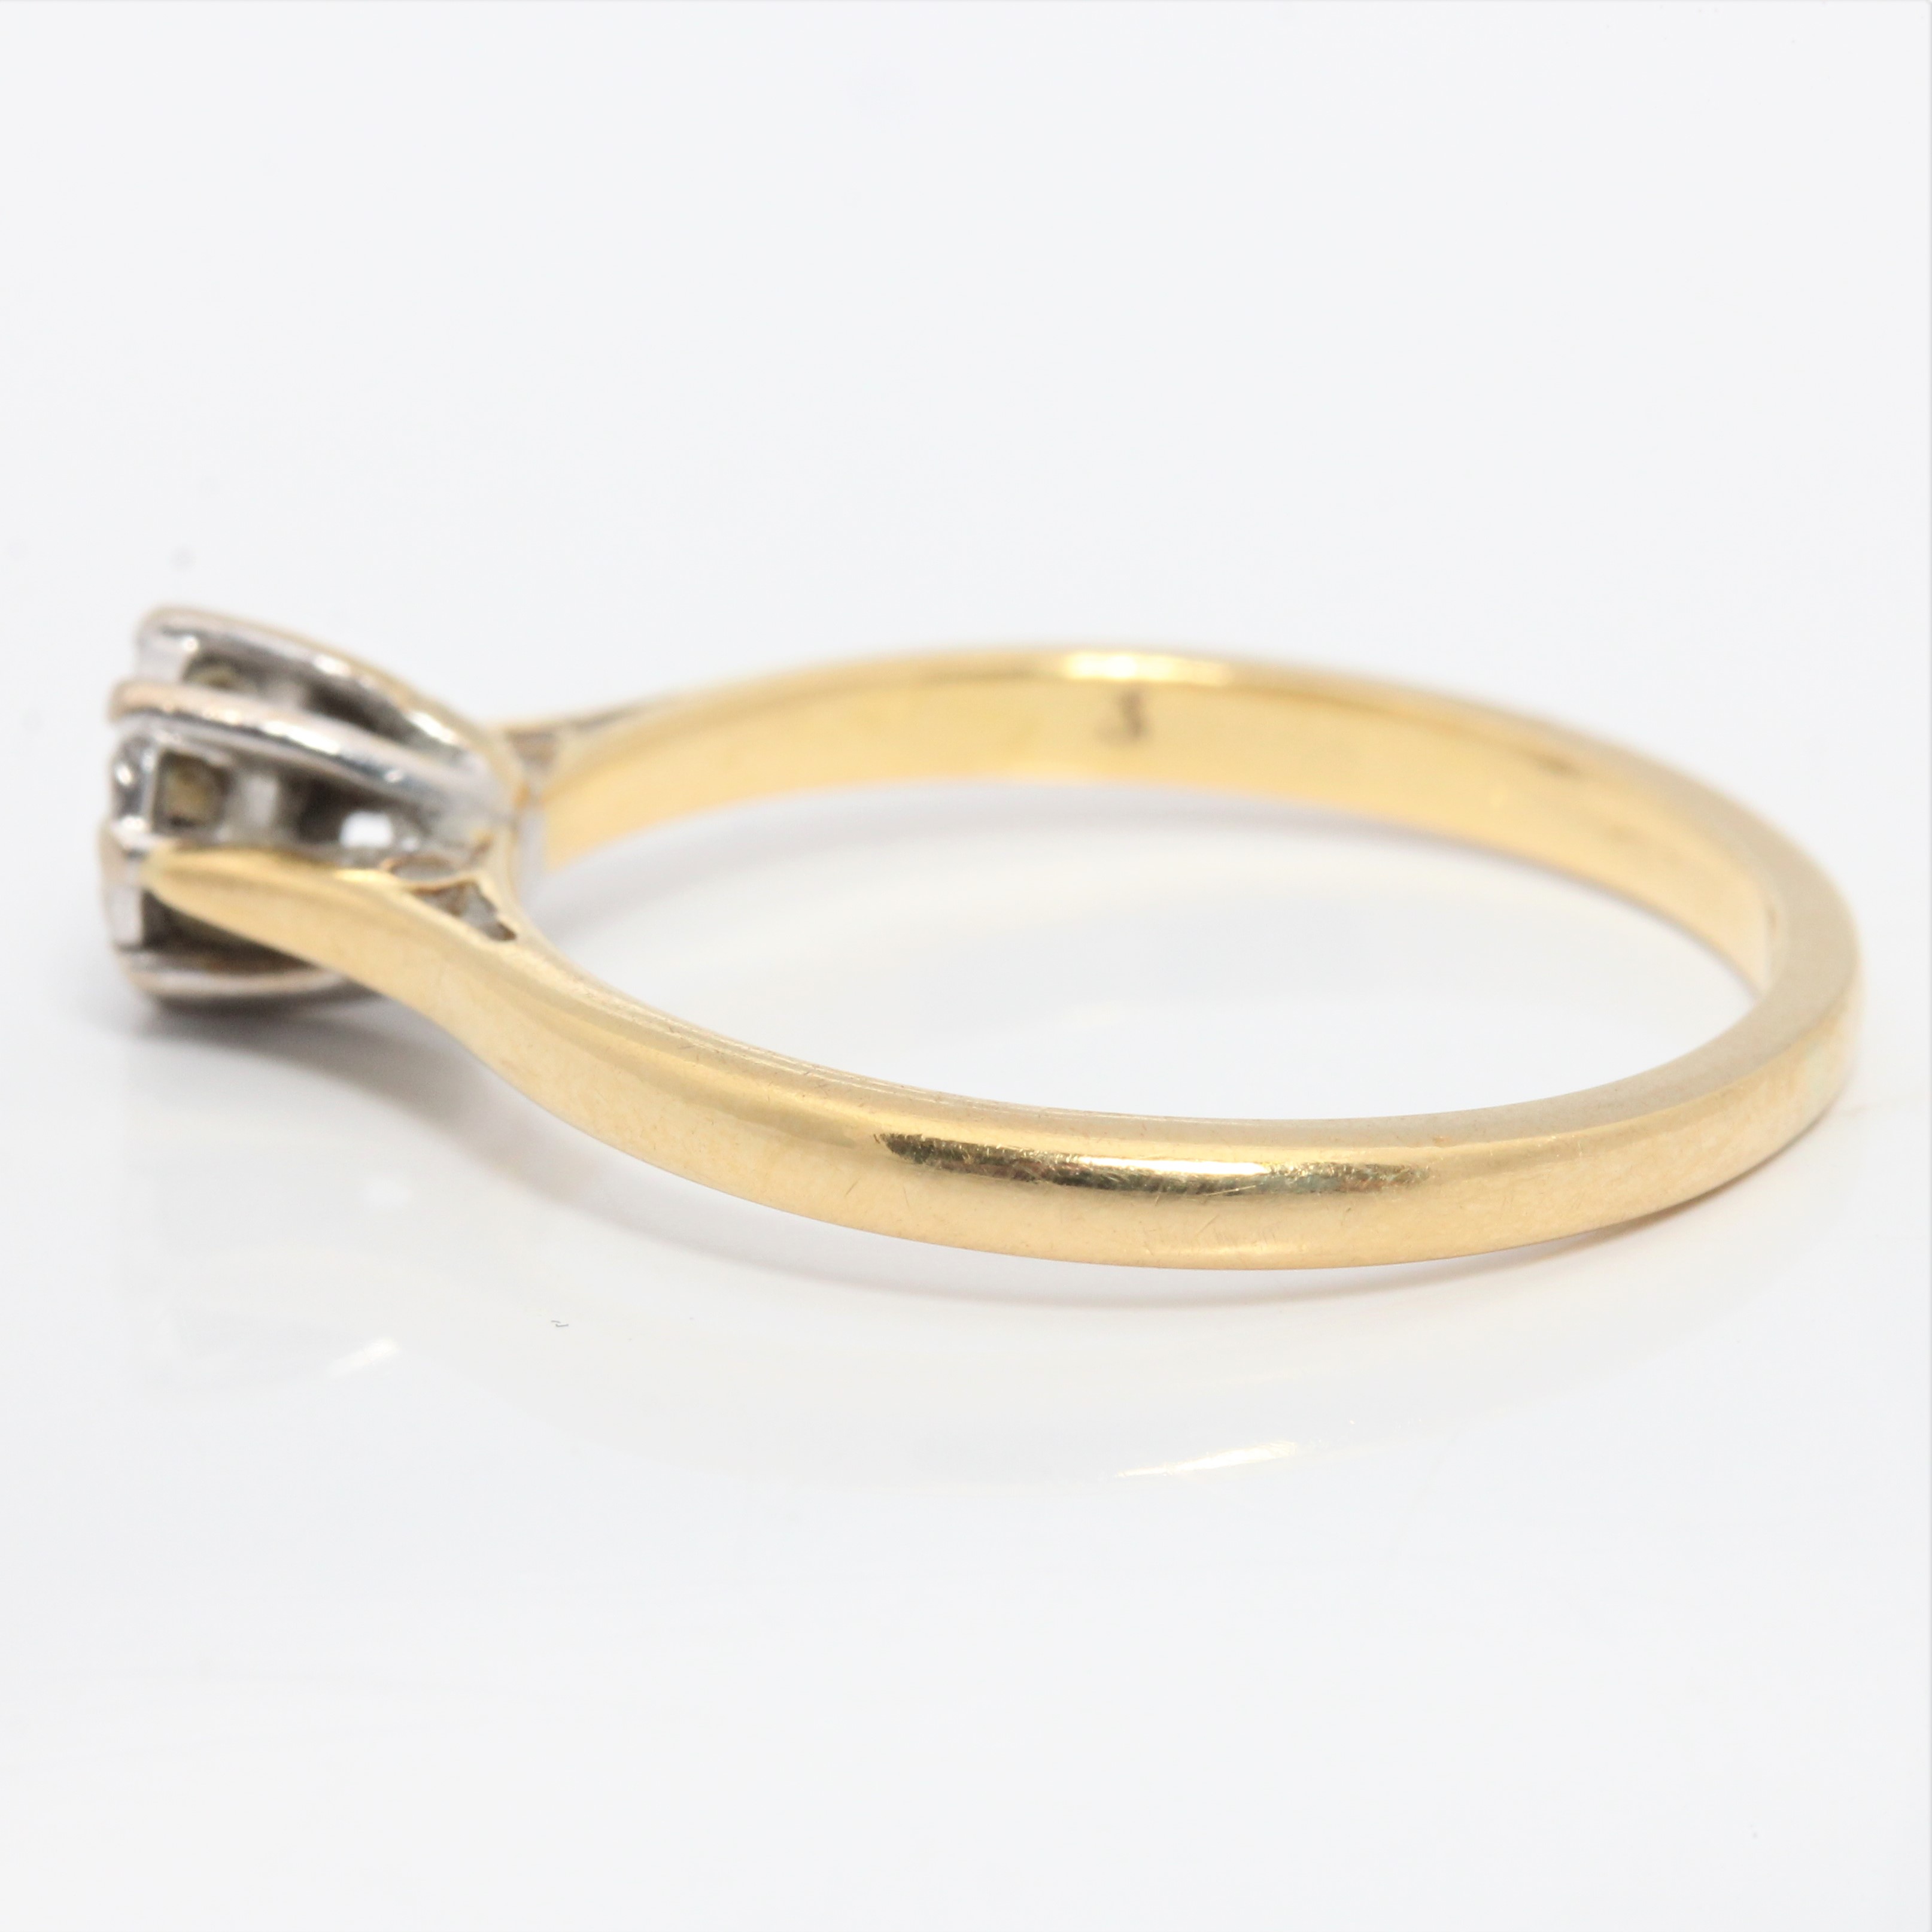 A hallmarked 18ct yellow gold diamond solitaire ring, illusion set with a round brilliant cut - Image 4 of 4